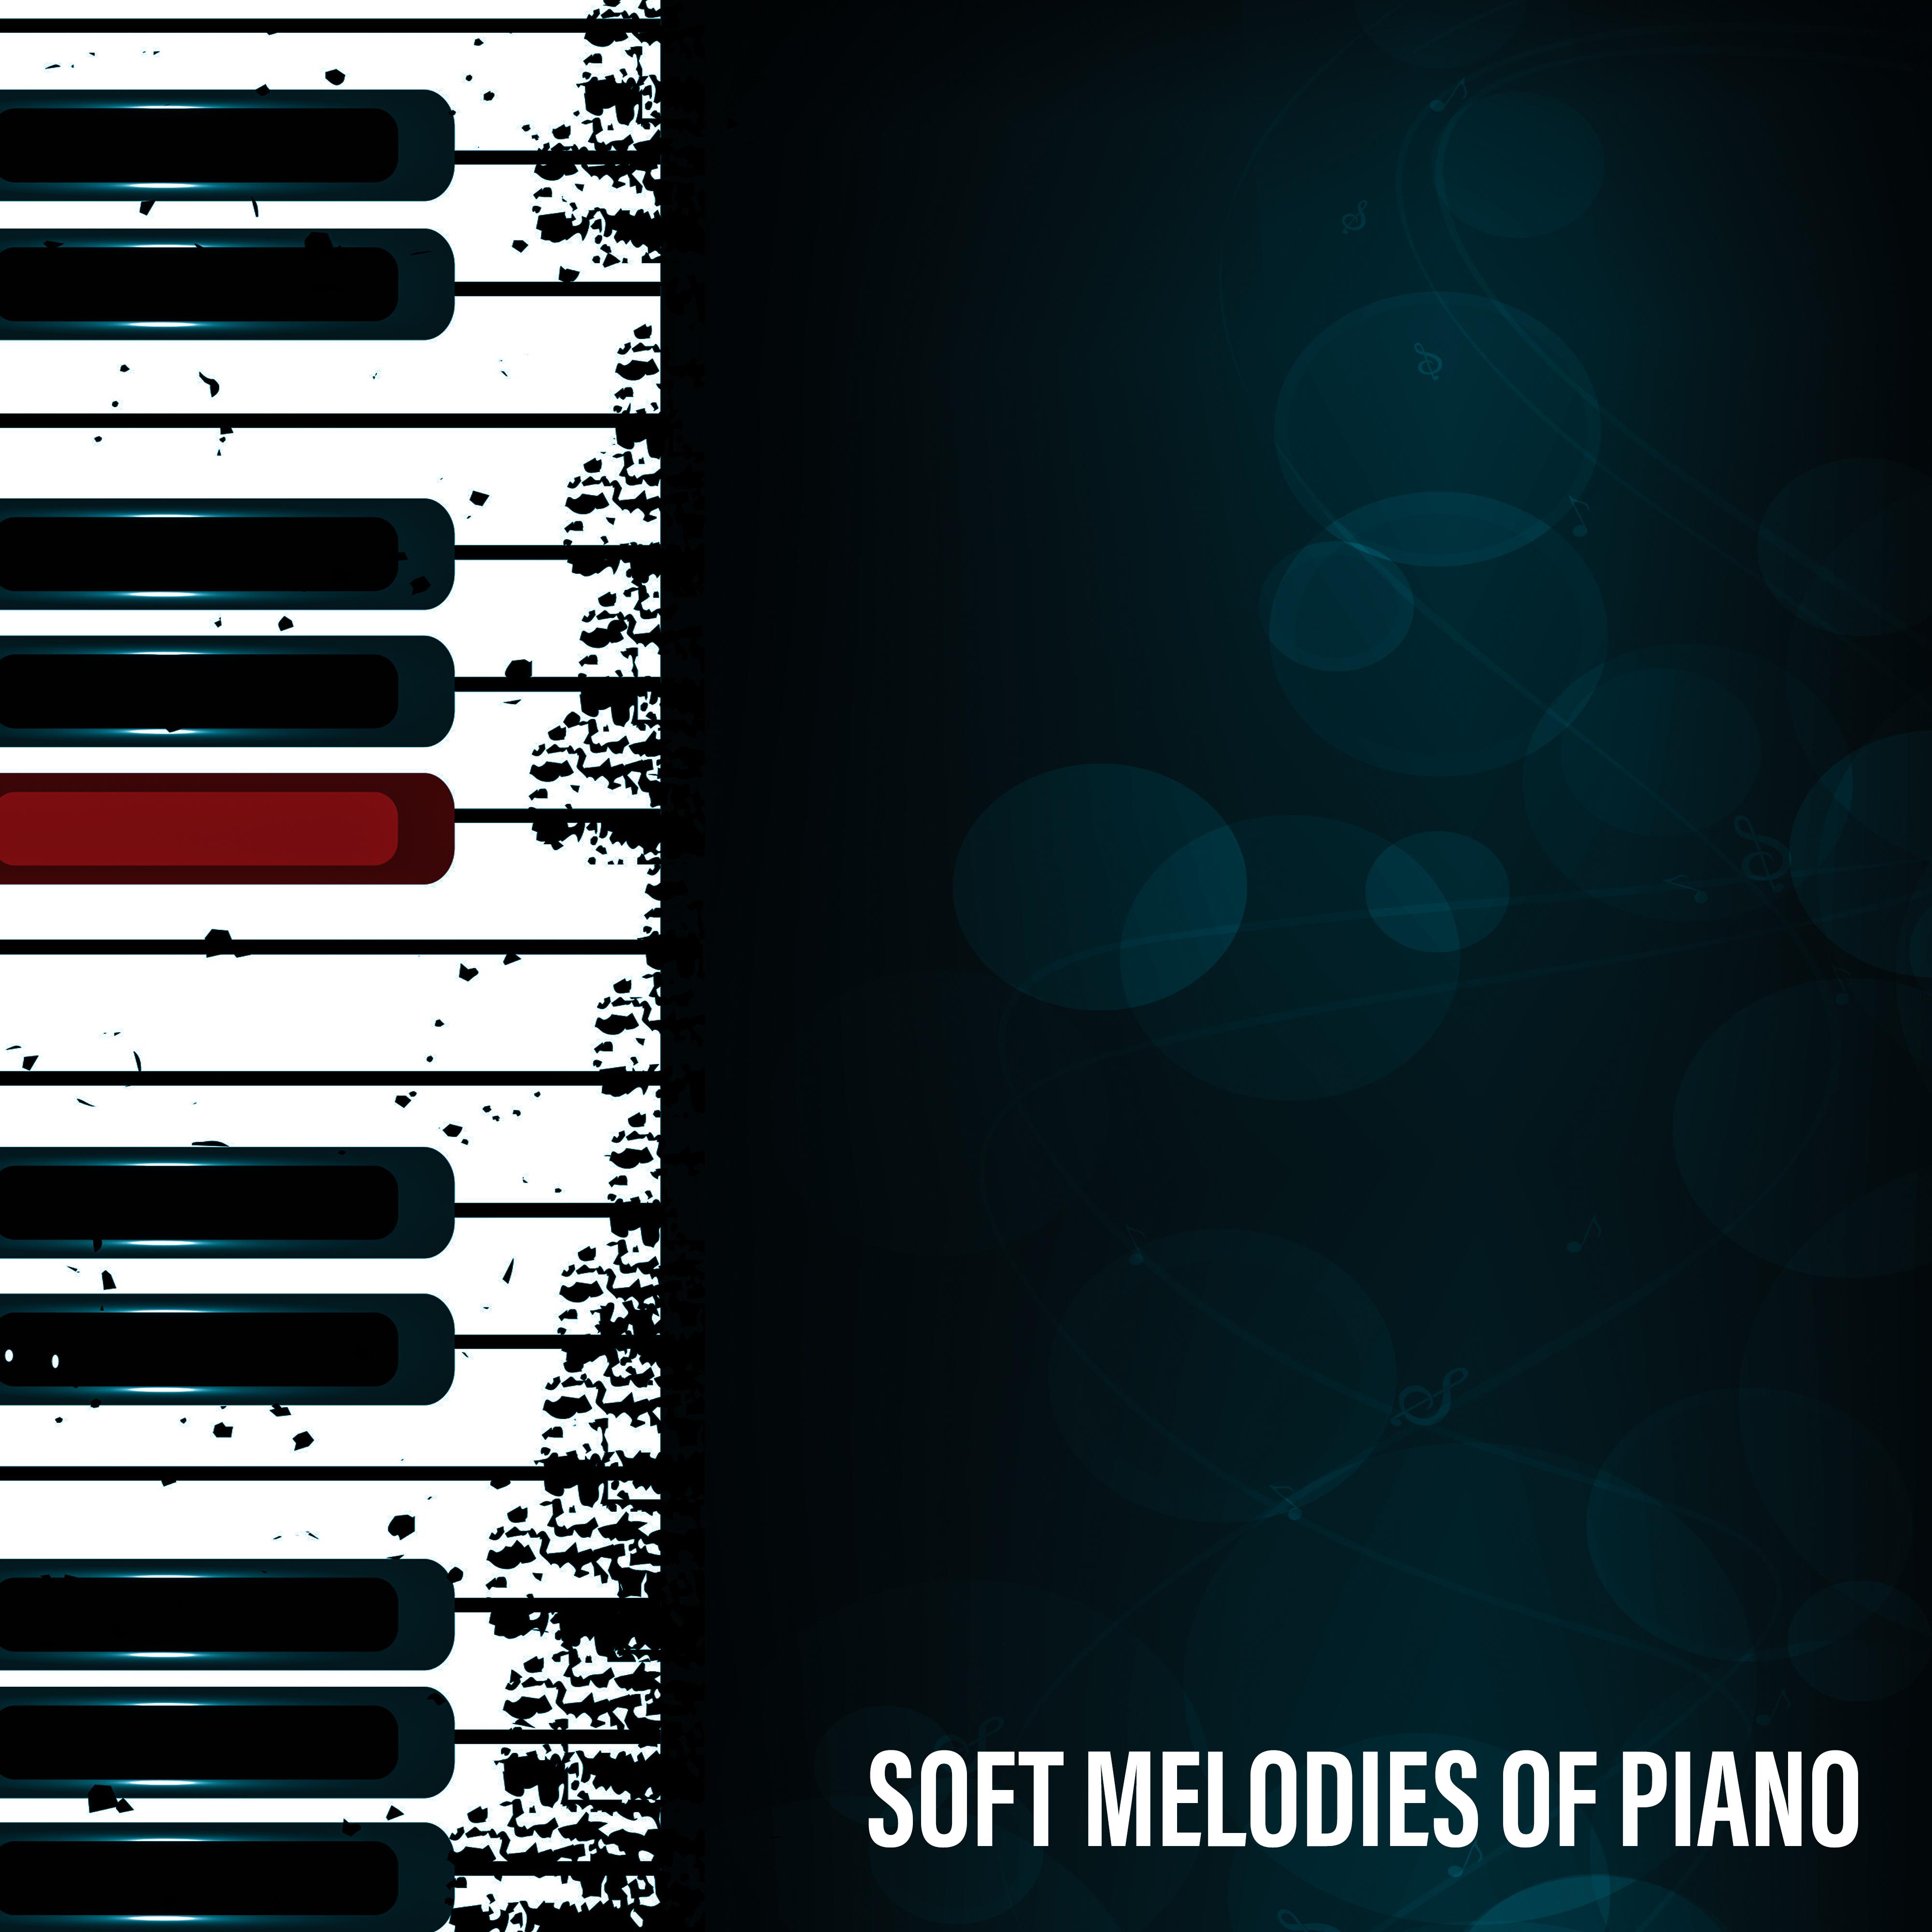 Soft Melodies of Piano